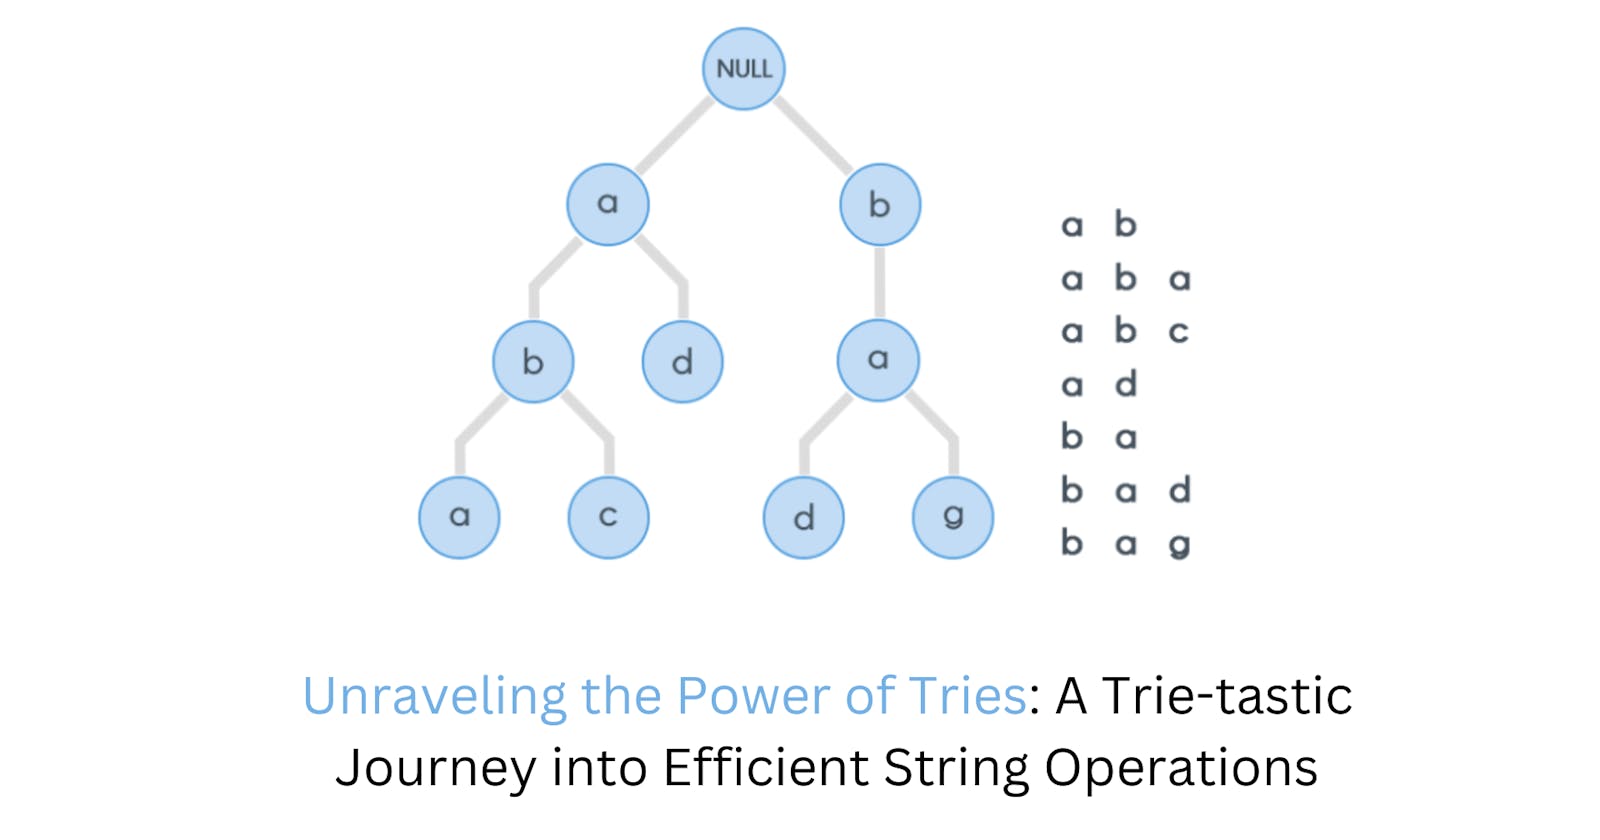 Unraveling the Power of Tries: A Trie-tastic Journey into Efficient String Operations